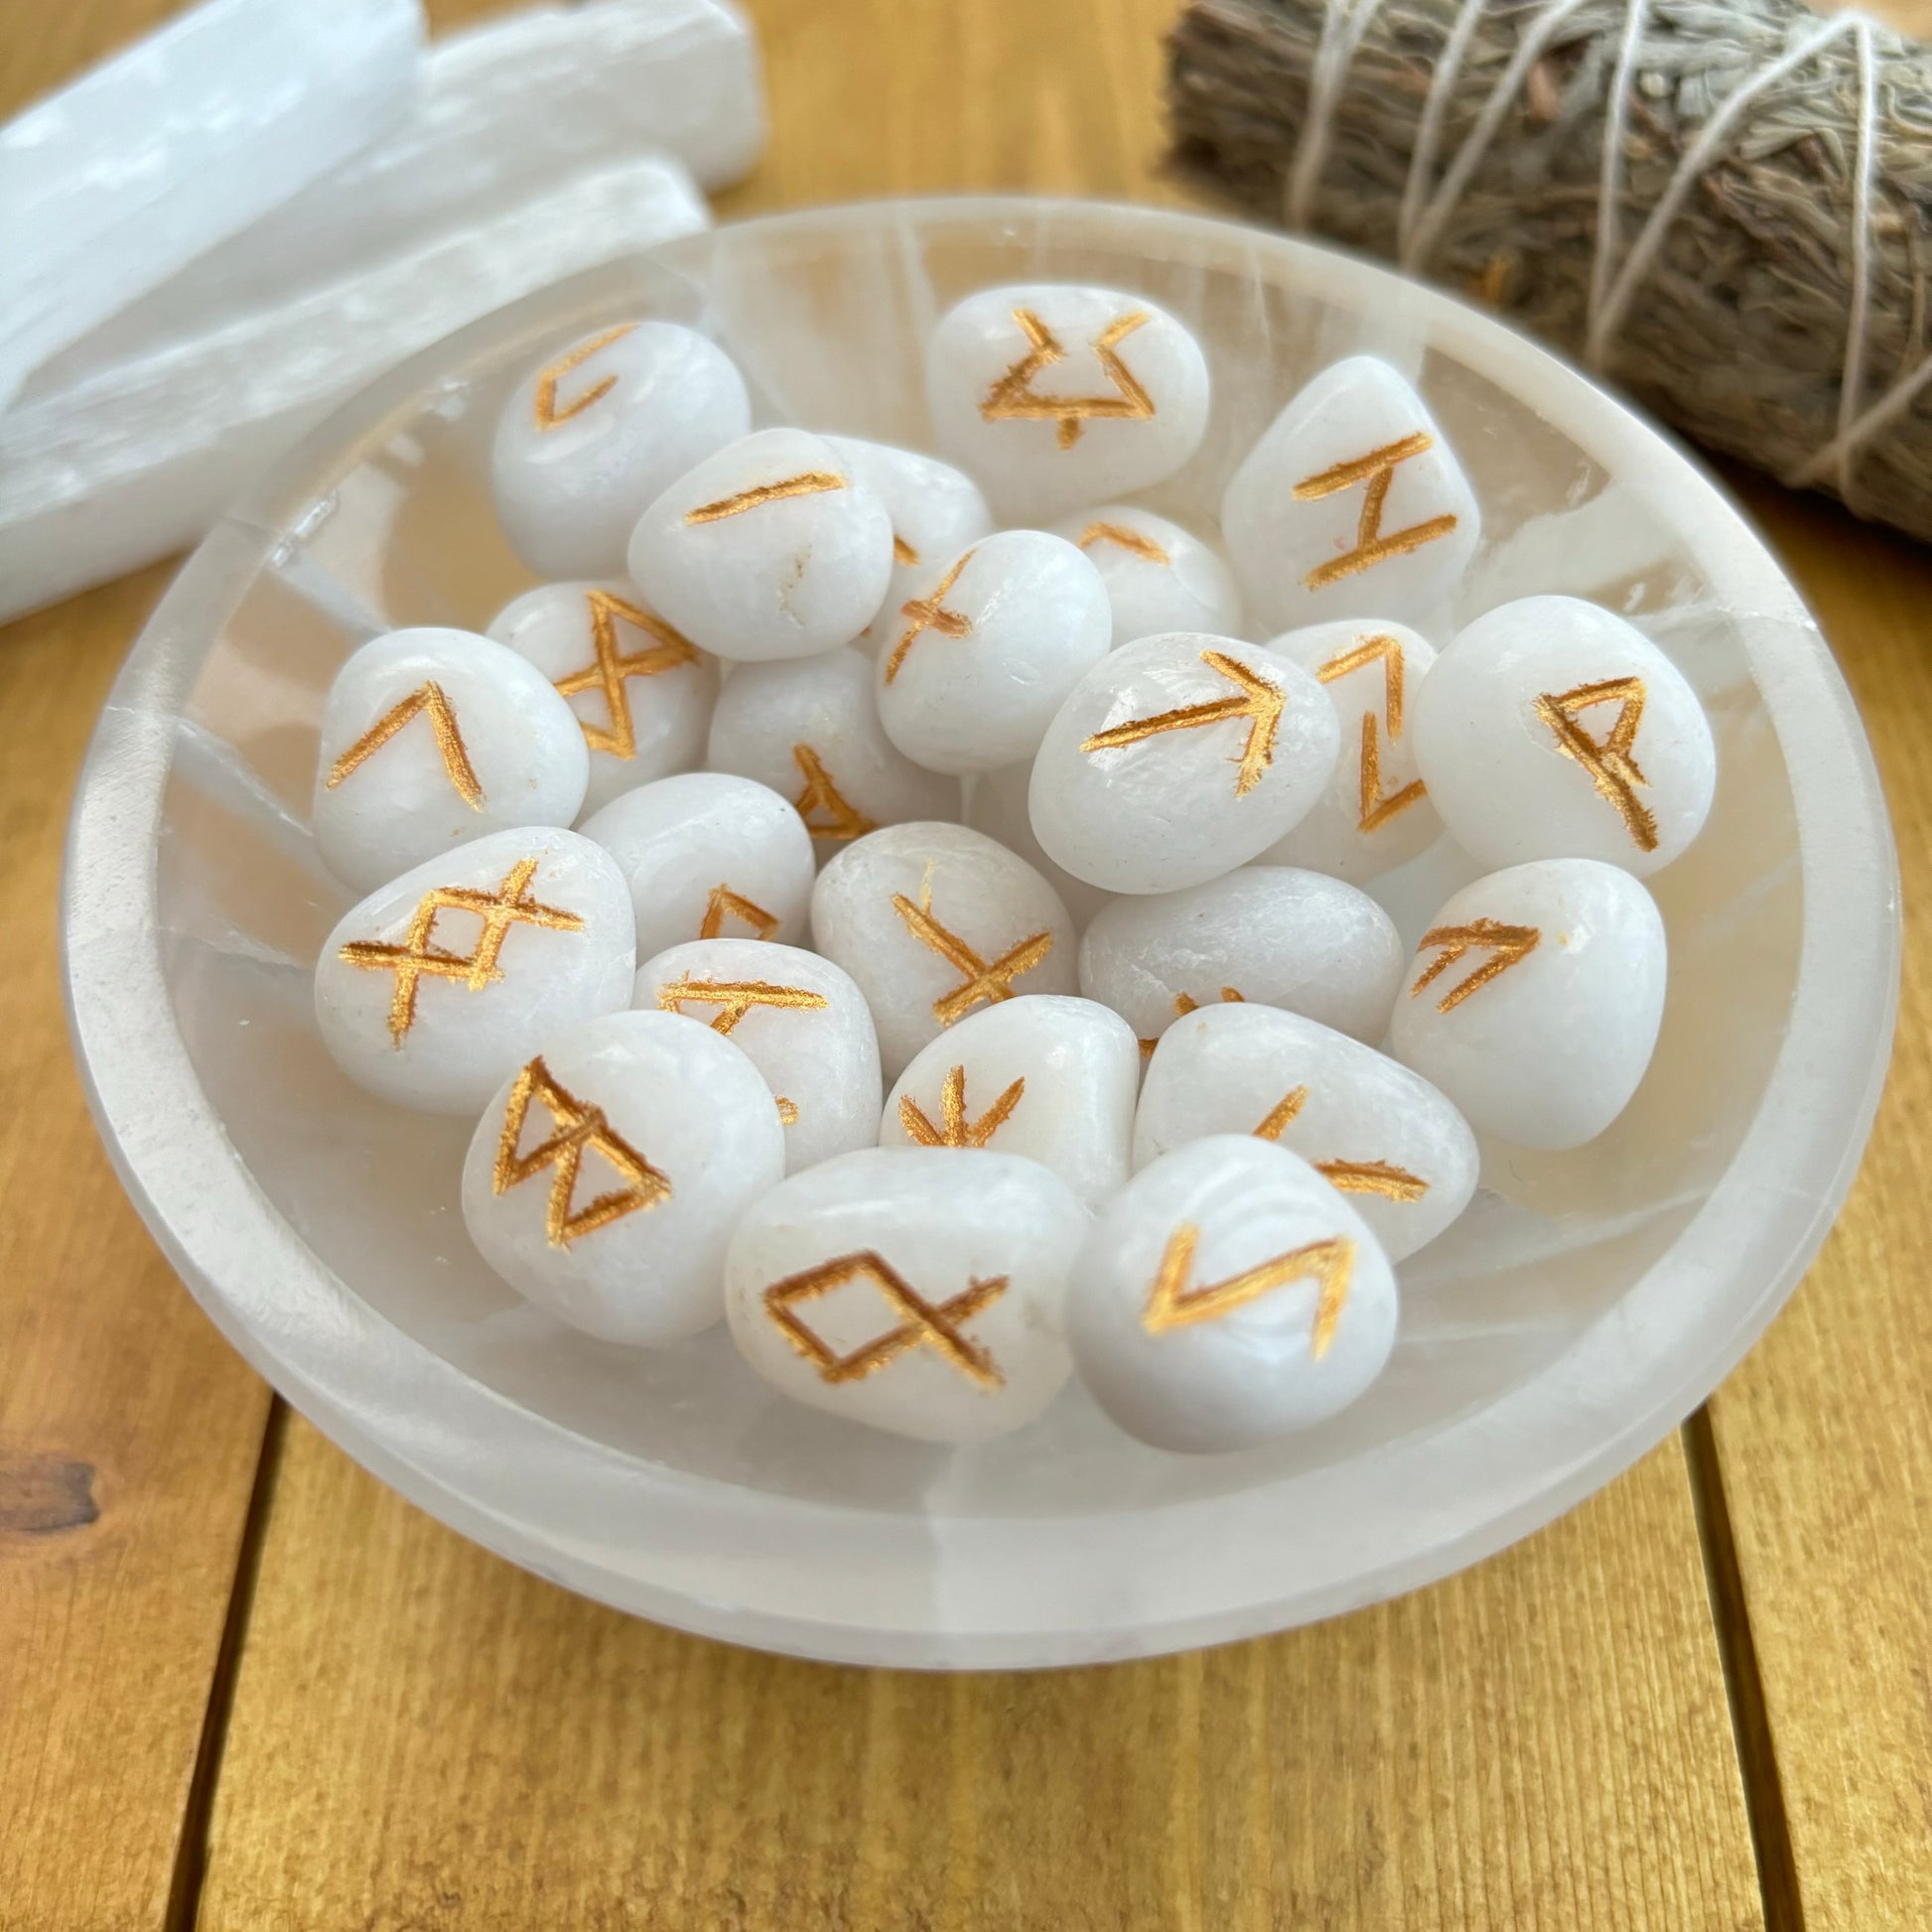 This beautiful set of White Agate runes can be used to bring new energy to your divination, magic, and meditation practices  This set of runes is intricately-carved with the ancient symbols of the gods of the North, and includes a charming pouch for easy carrying. Each set has 25 Runes, 24 with characters on them and a single blank rune